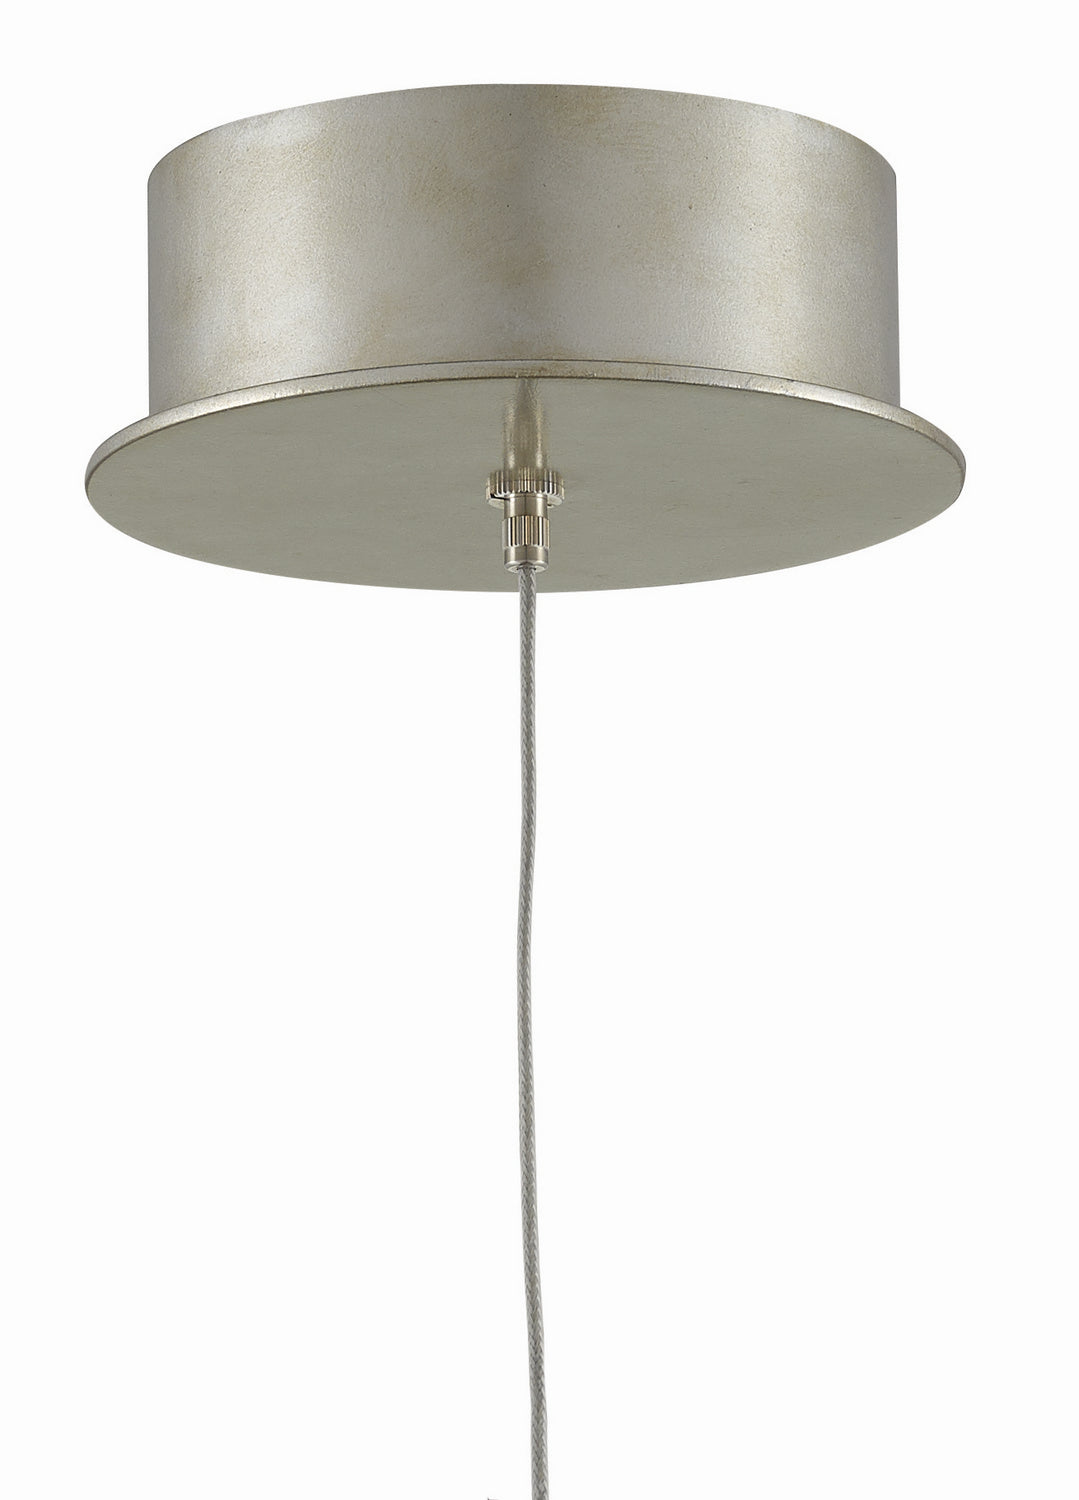 One Light Pendant from the Pepper collection in Painted Silver/Nickel finish